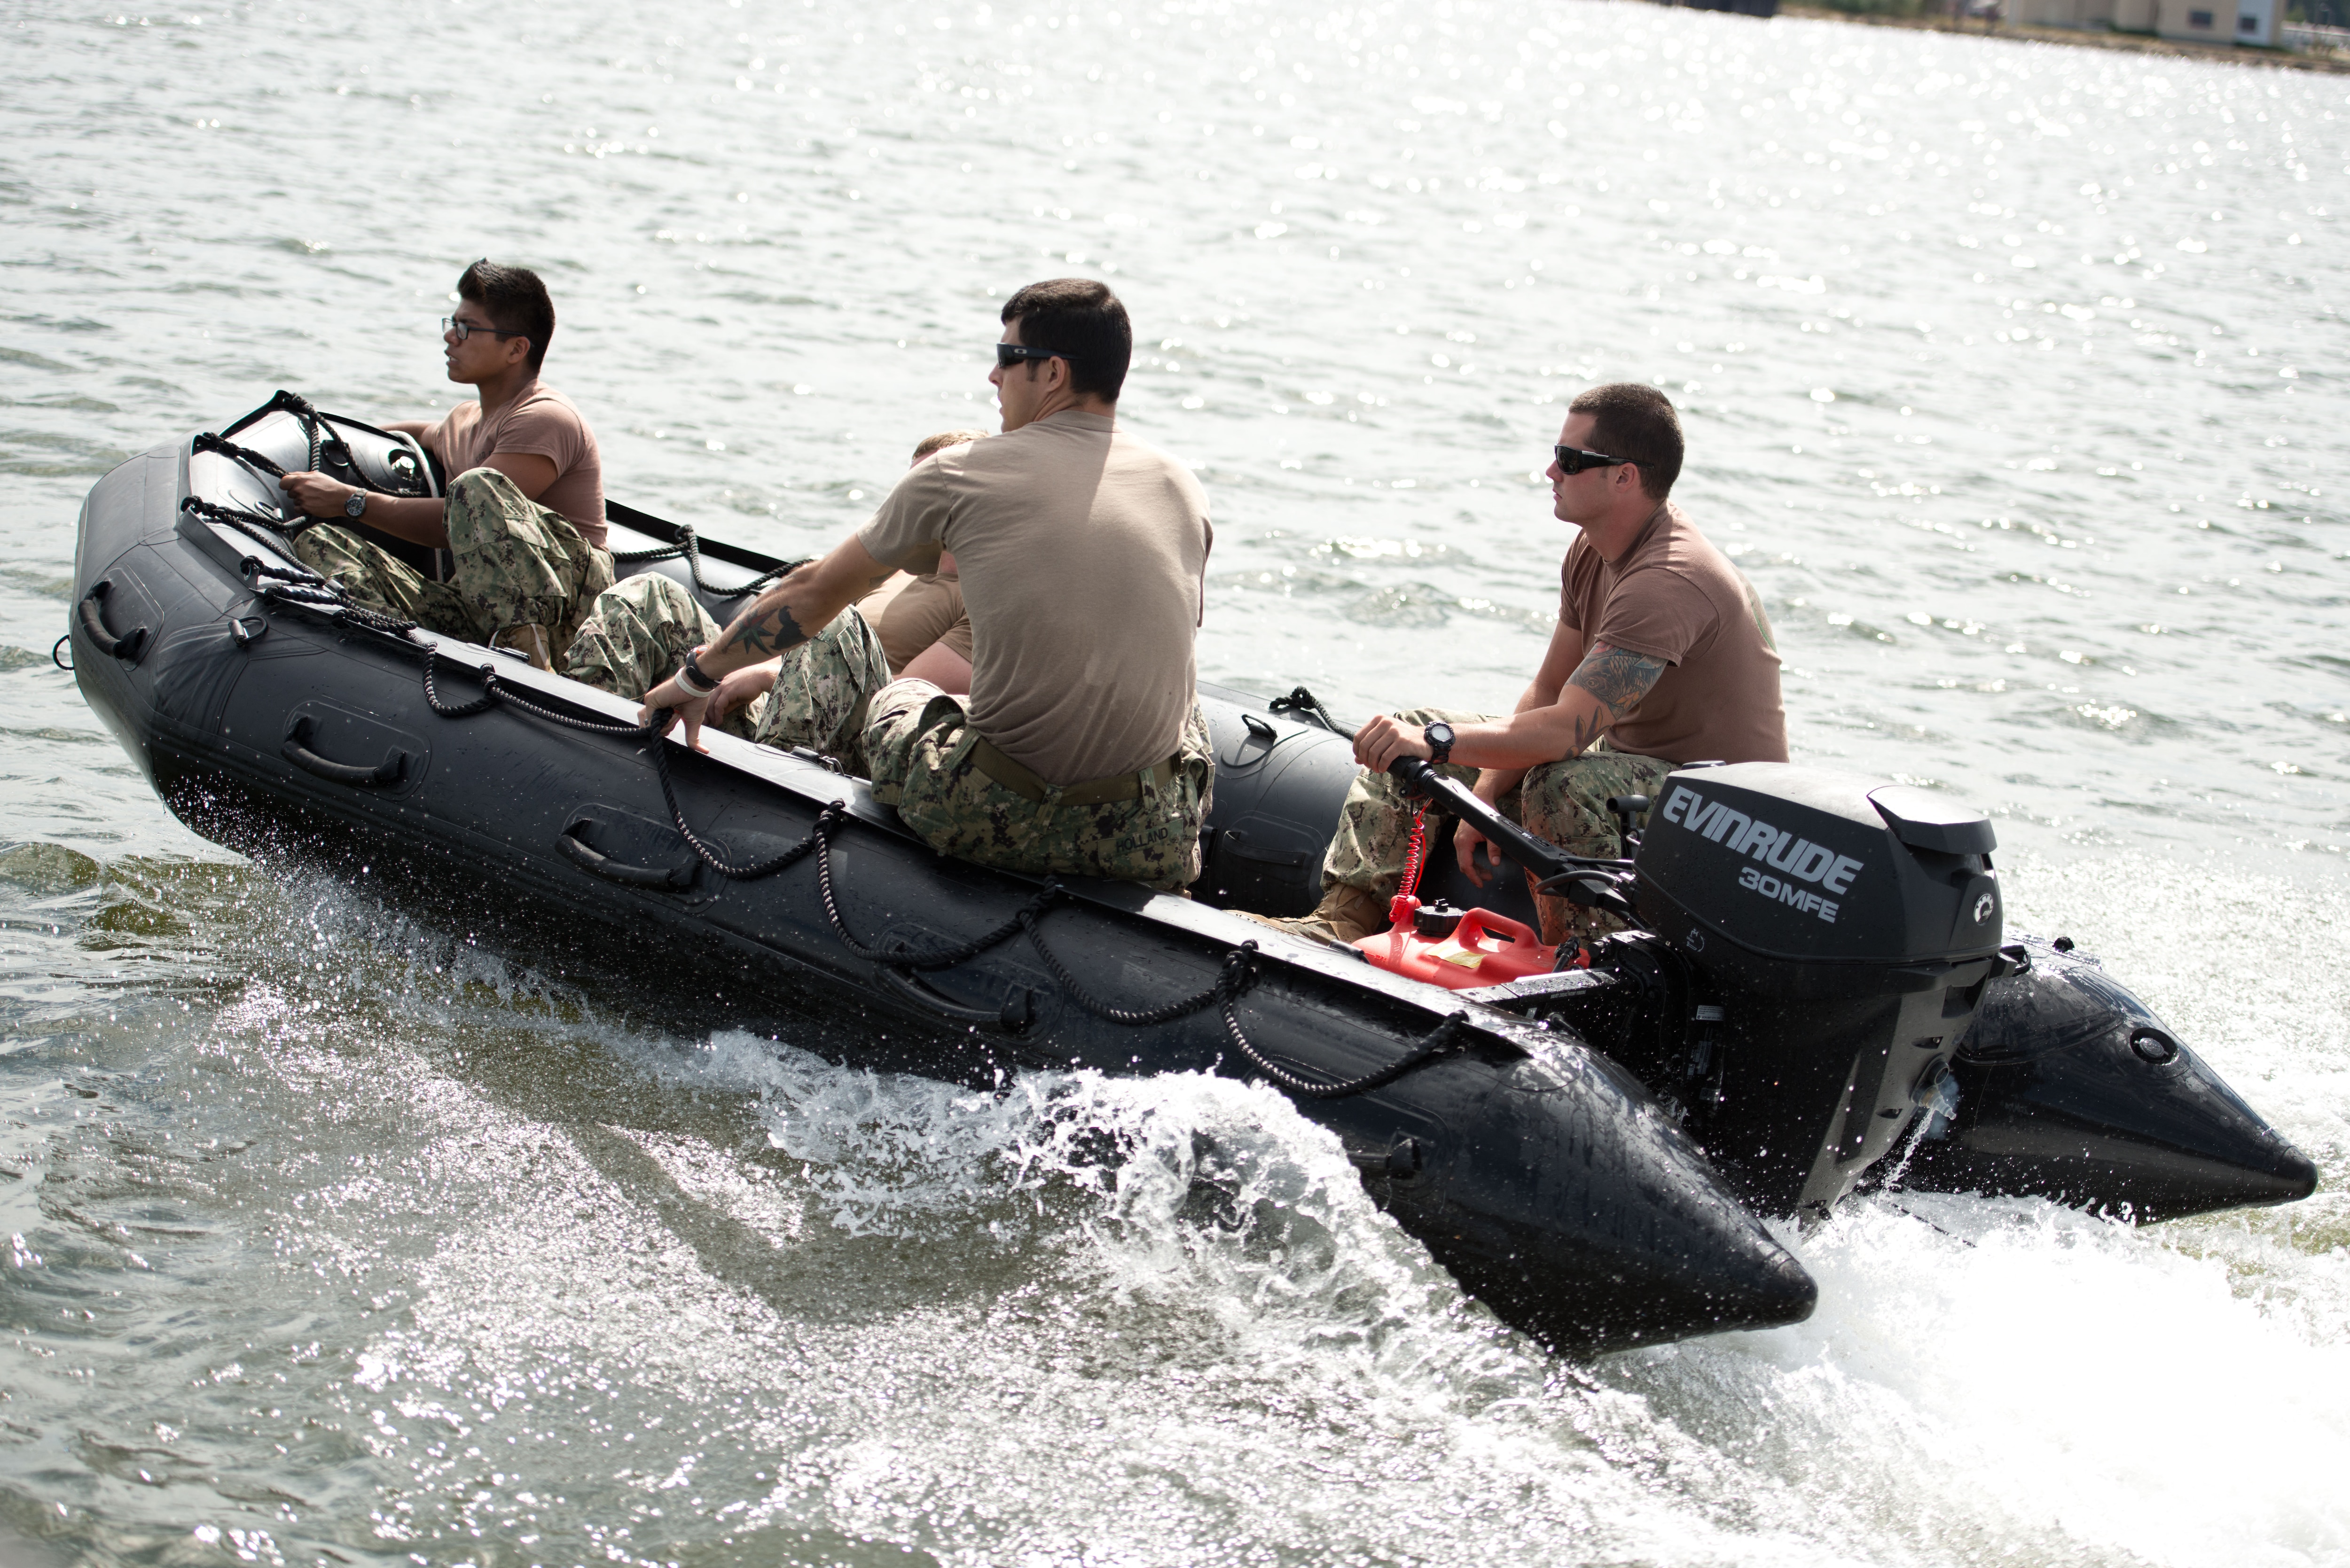 Military personnel driving a boat yielding an Evinrude motor